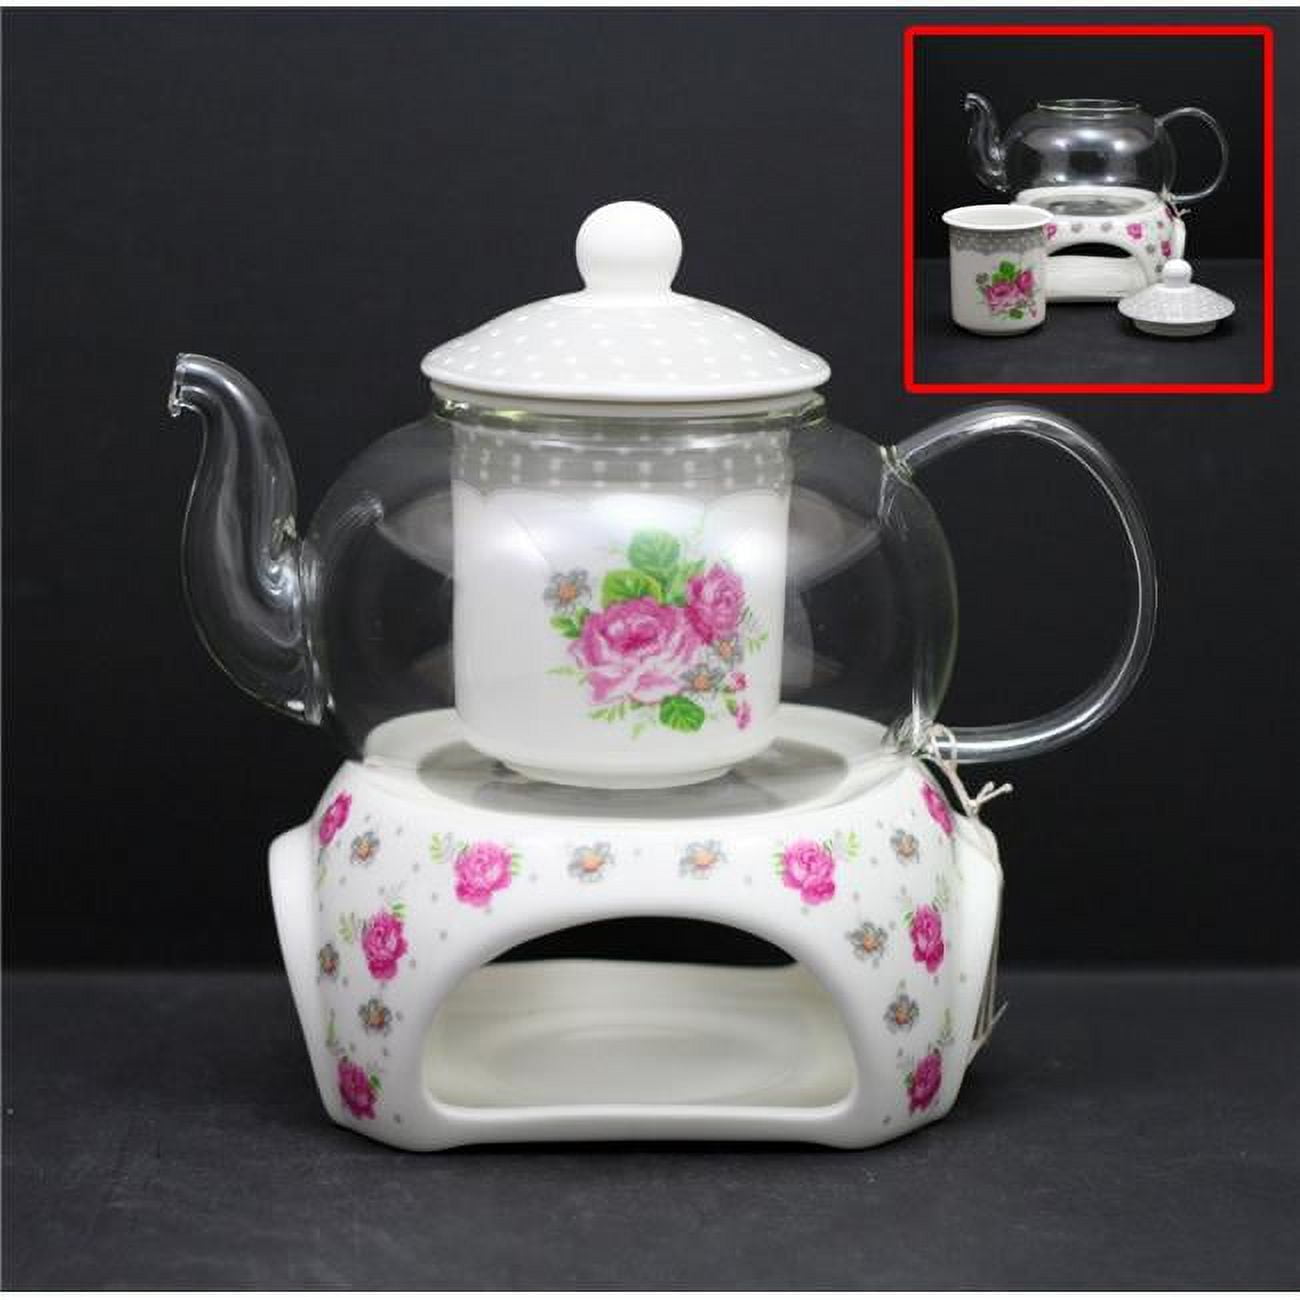 Picture of ACE AC-X4702 Teapot Set - 850cc Heatproof Glass Teapot with infuser